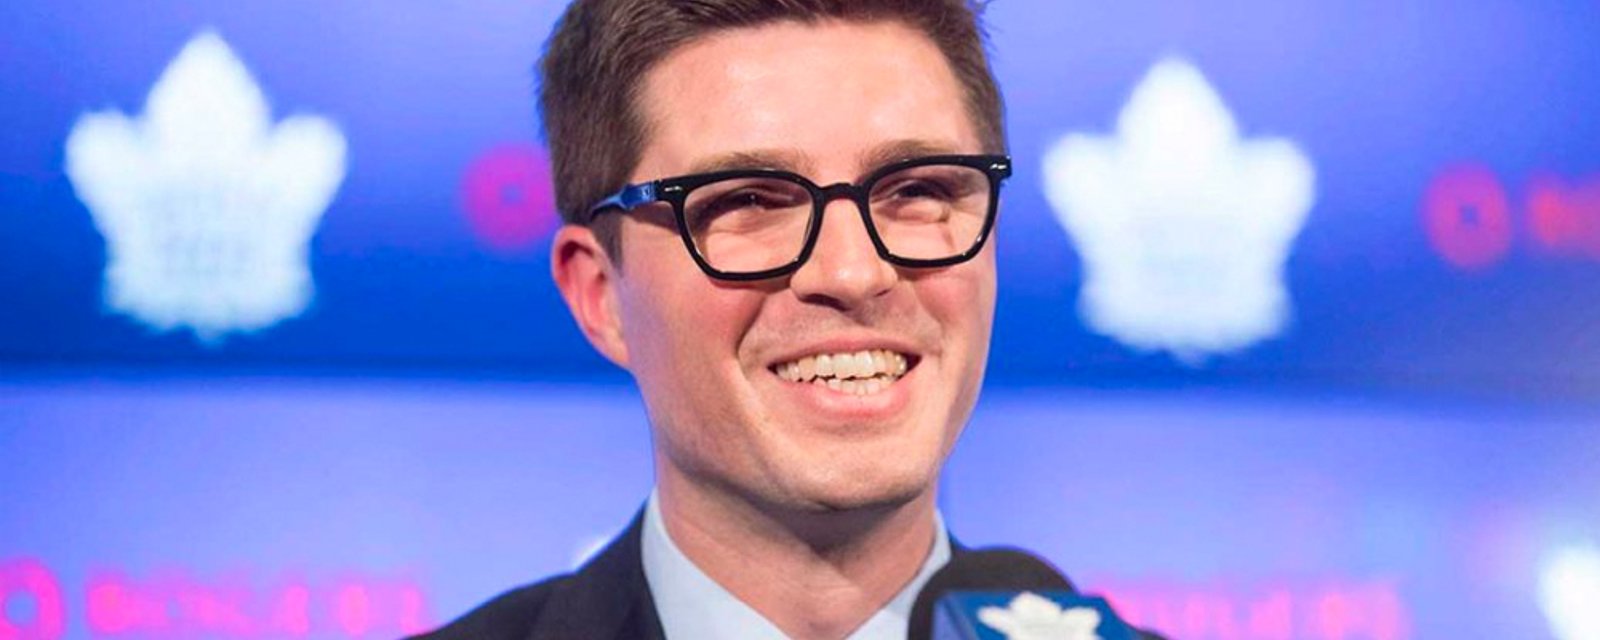 Kyle Dubas chosen by NHL agents as the best GM to take advantage of in negotiations